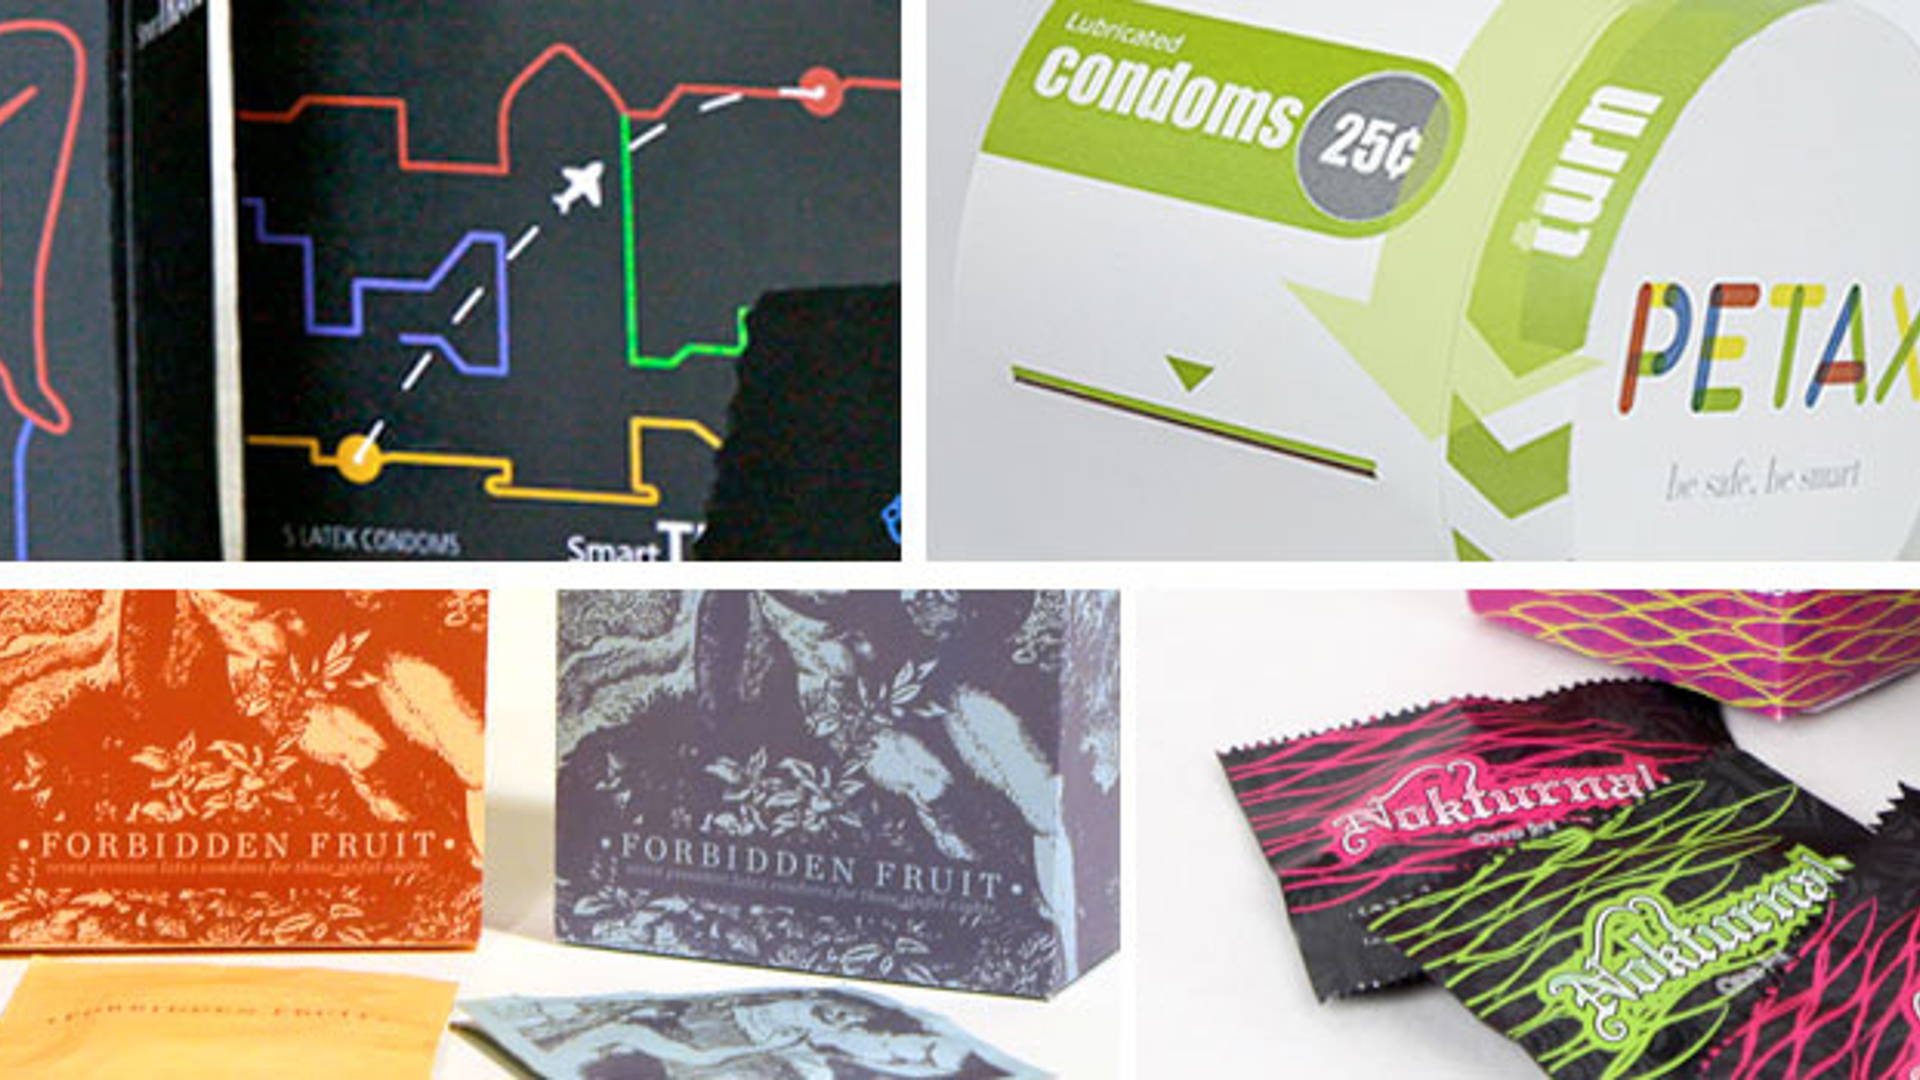 Featured image for Student Spotlight: Cornish College of the Arts, Condom Packaging Project